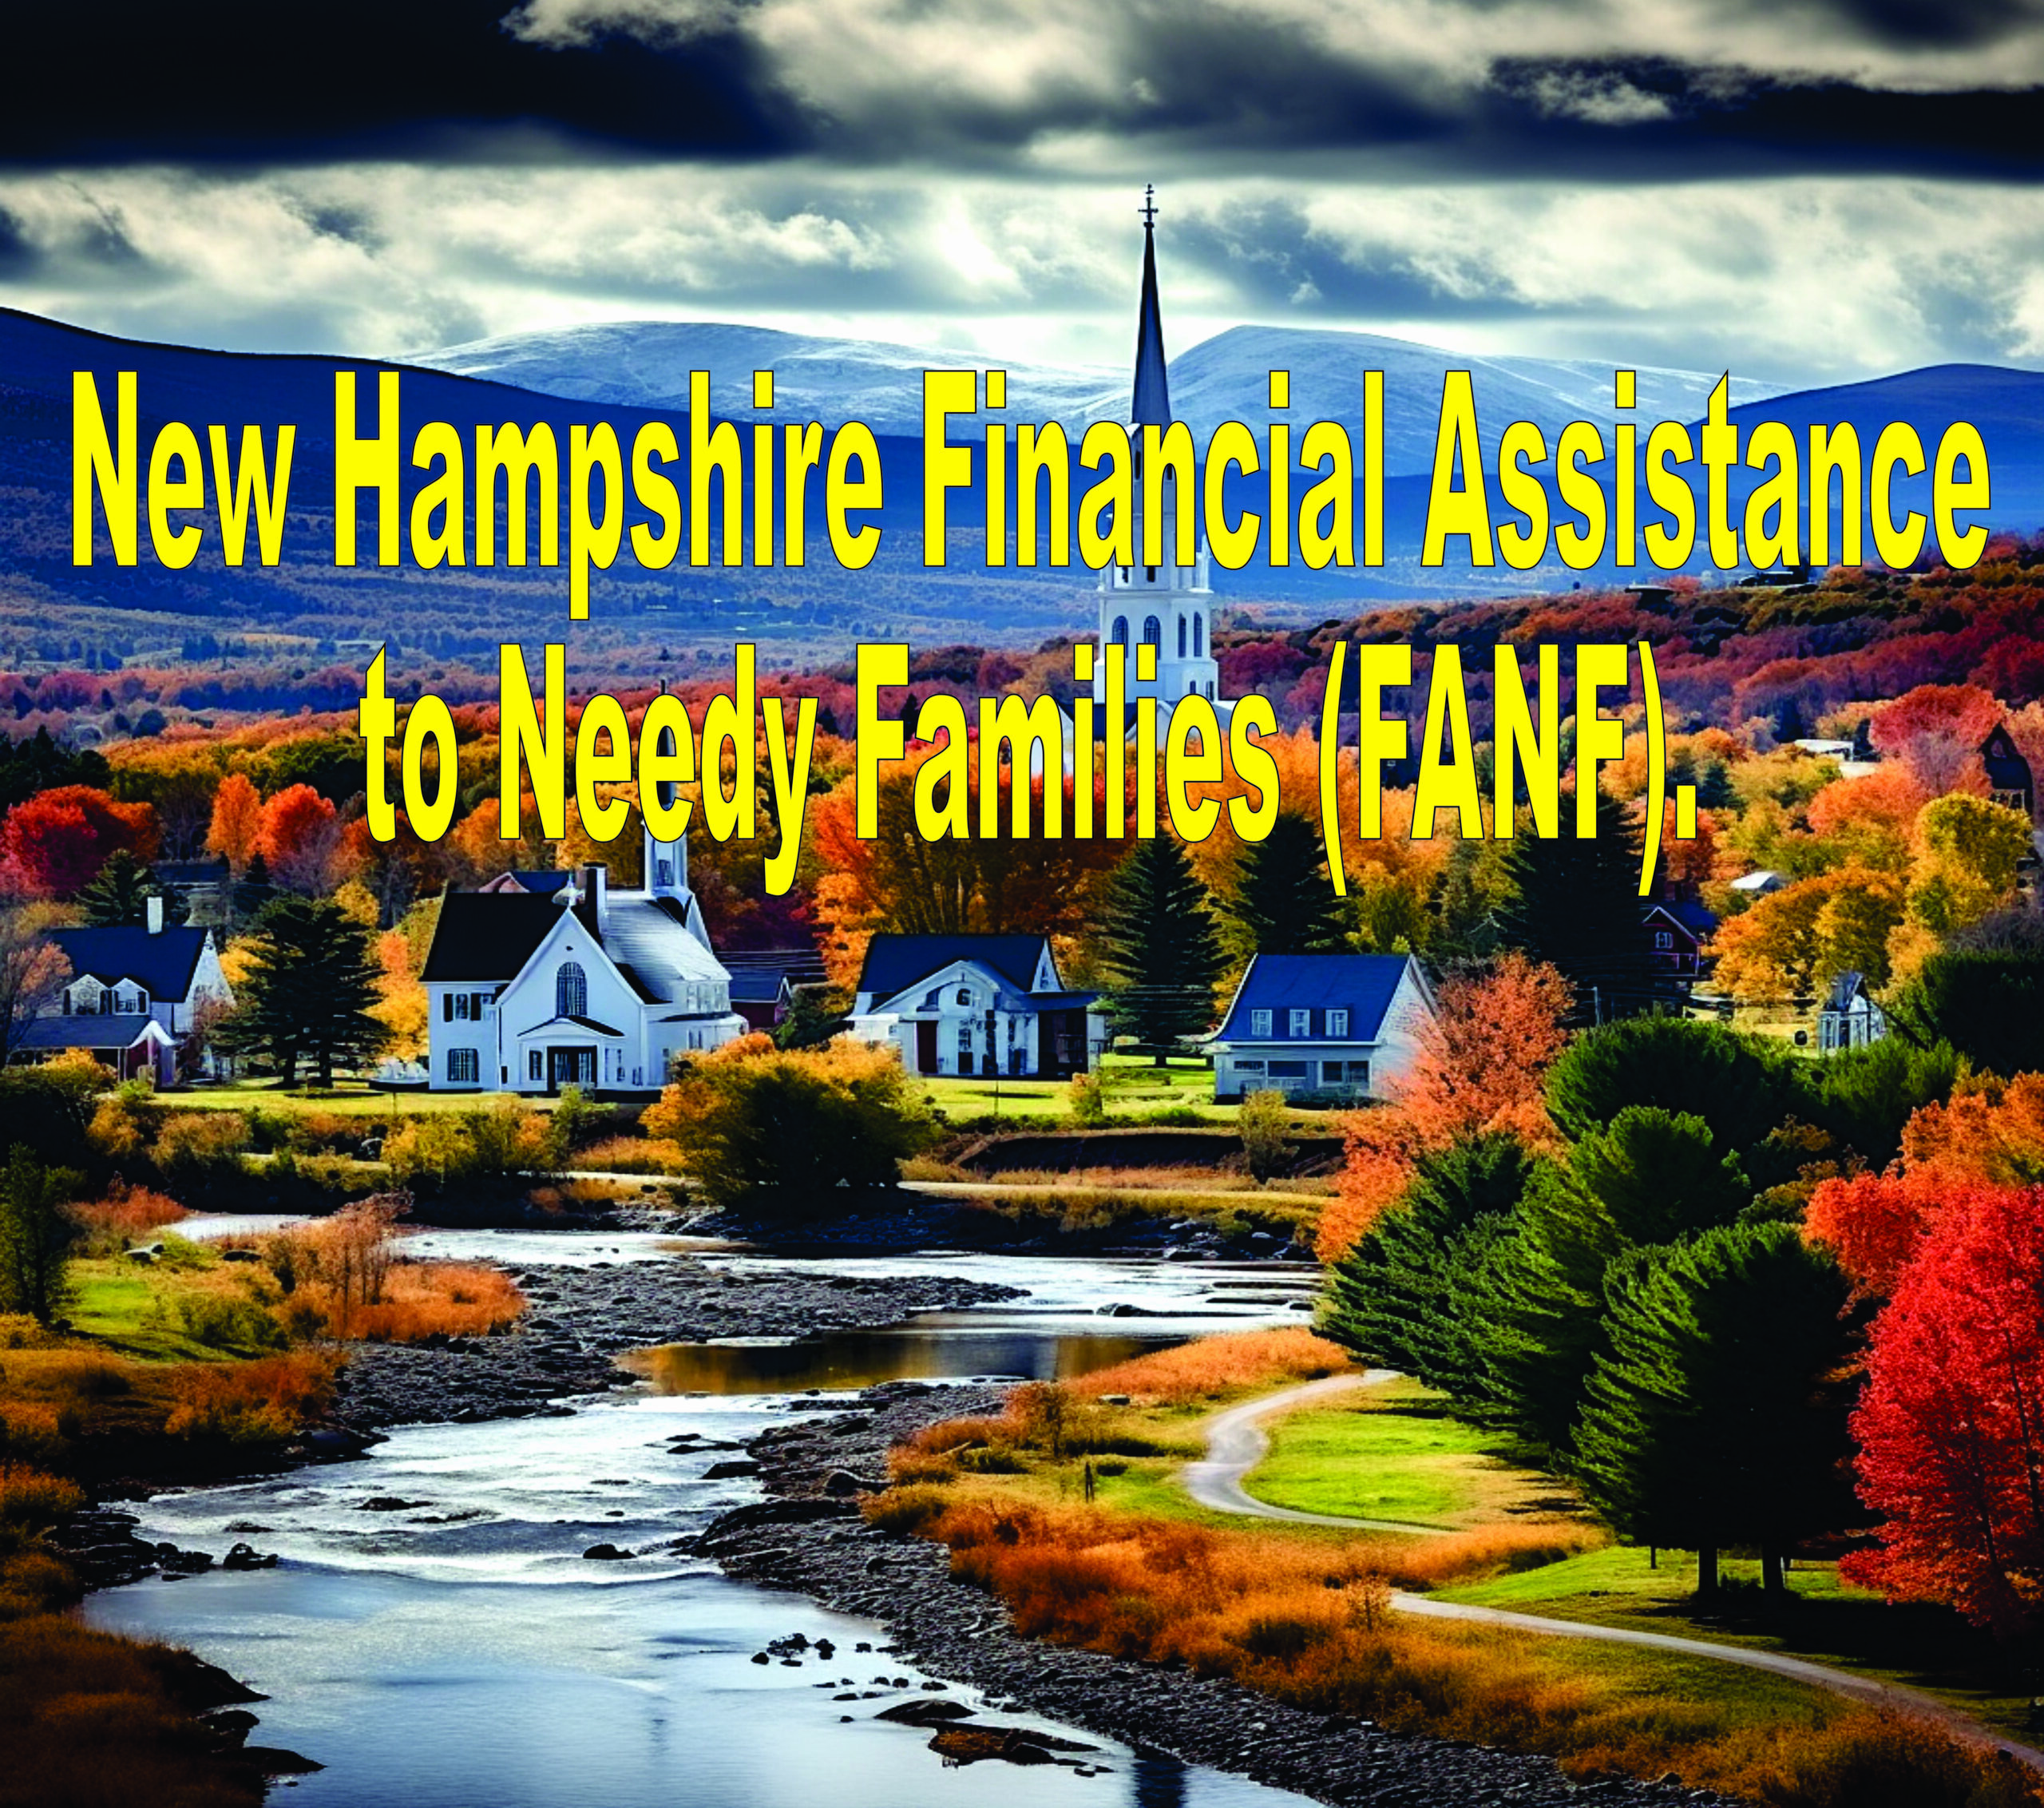 New Hampshire Financial Assistance To Needy Families (fanf)